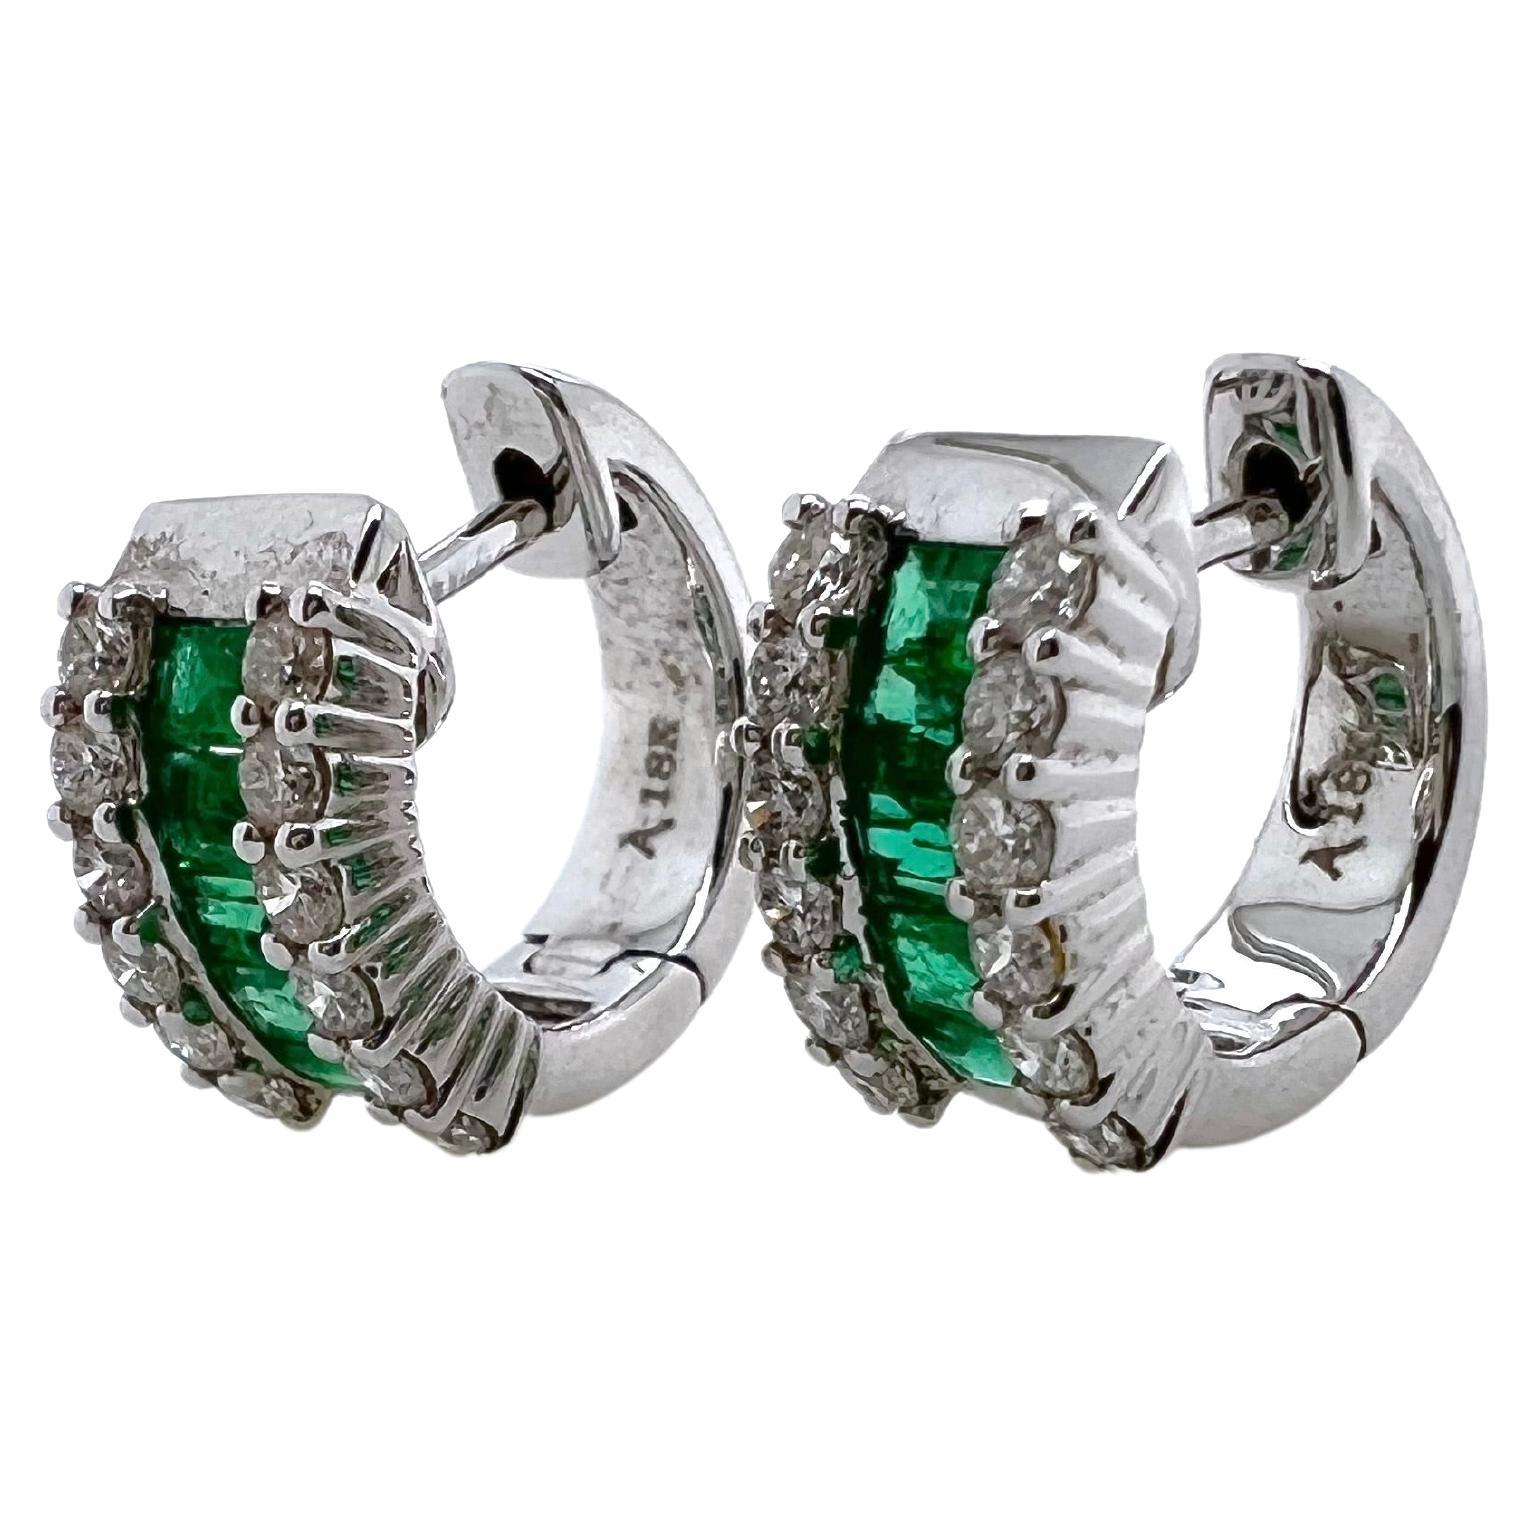 These are perfect for daily wear and add some color to your life.  The easy to wear huggie earrings are designed to hug the ear lobes and can be worn casually or for smart casual events.  The emerald baguettes are channeled set and the round